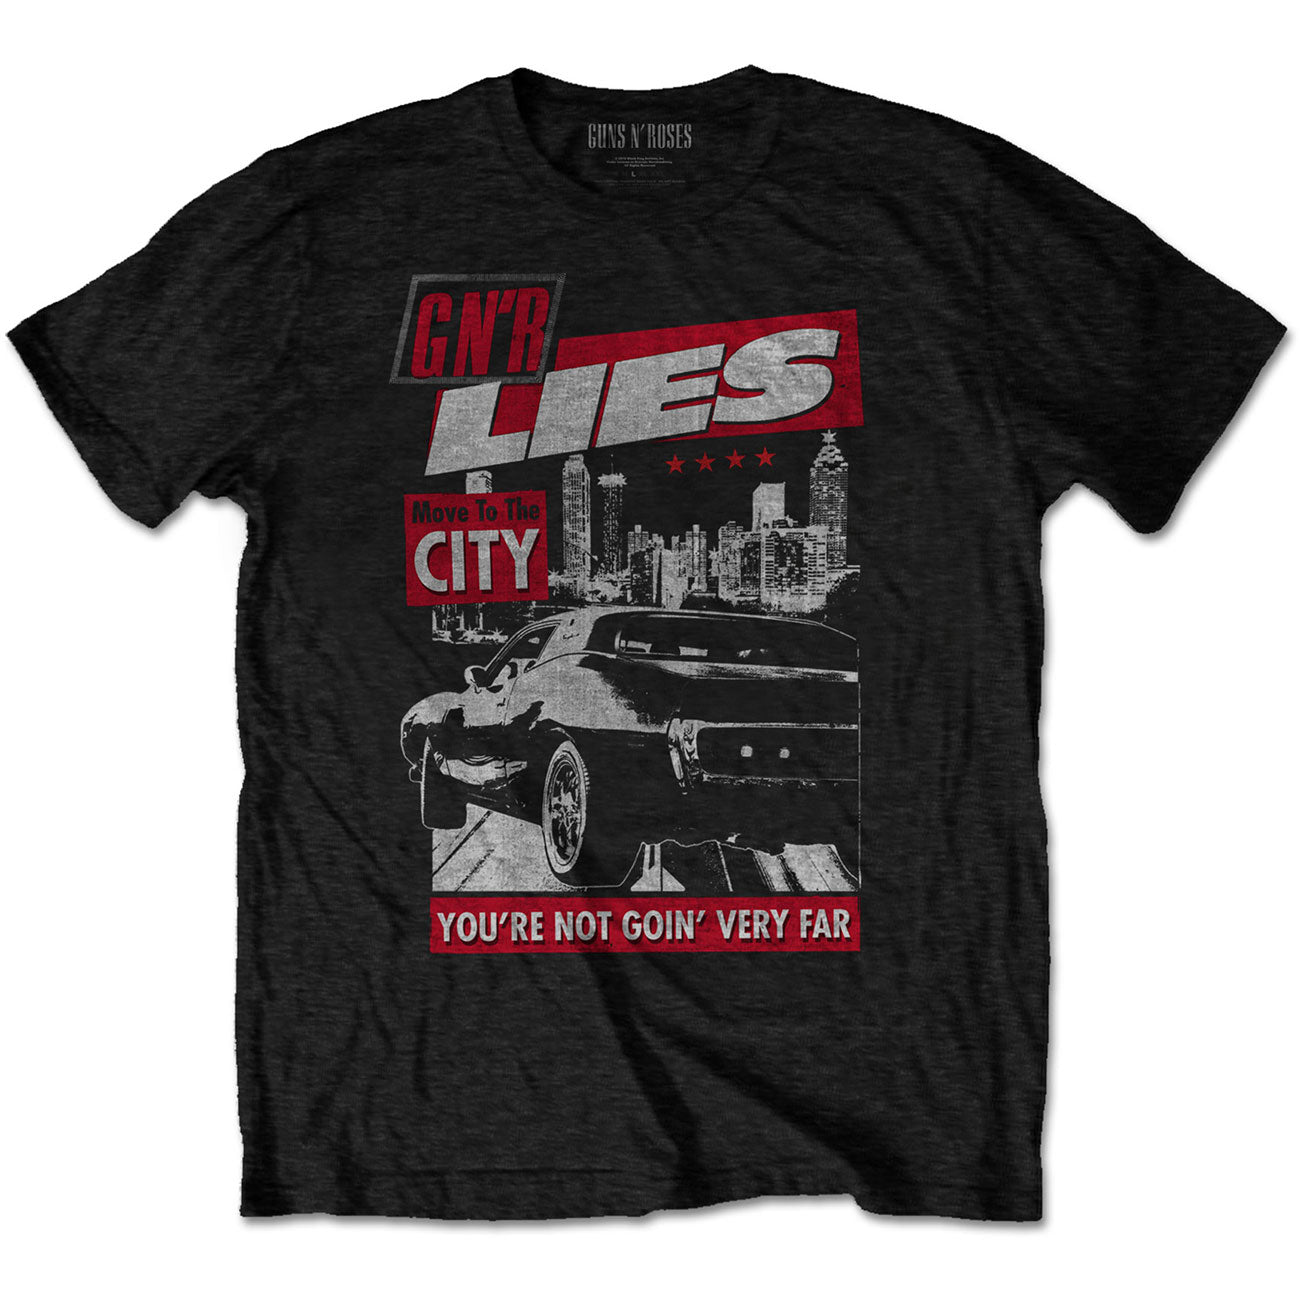 Guns N' Roses Unisex T-Shirt: Move to the City